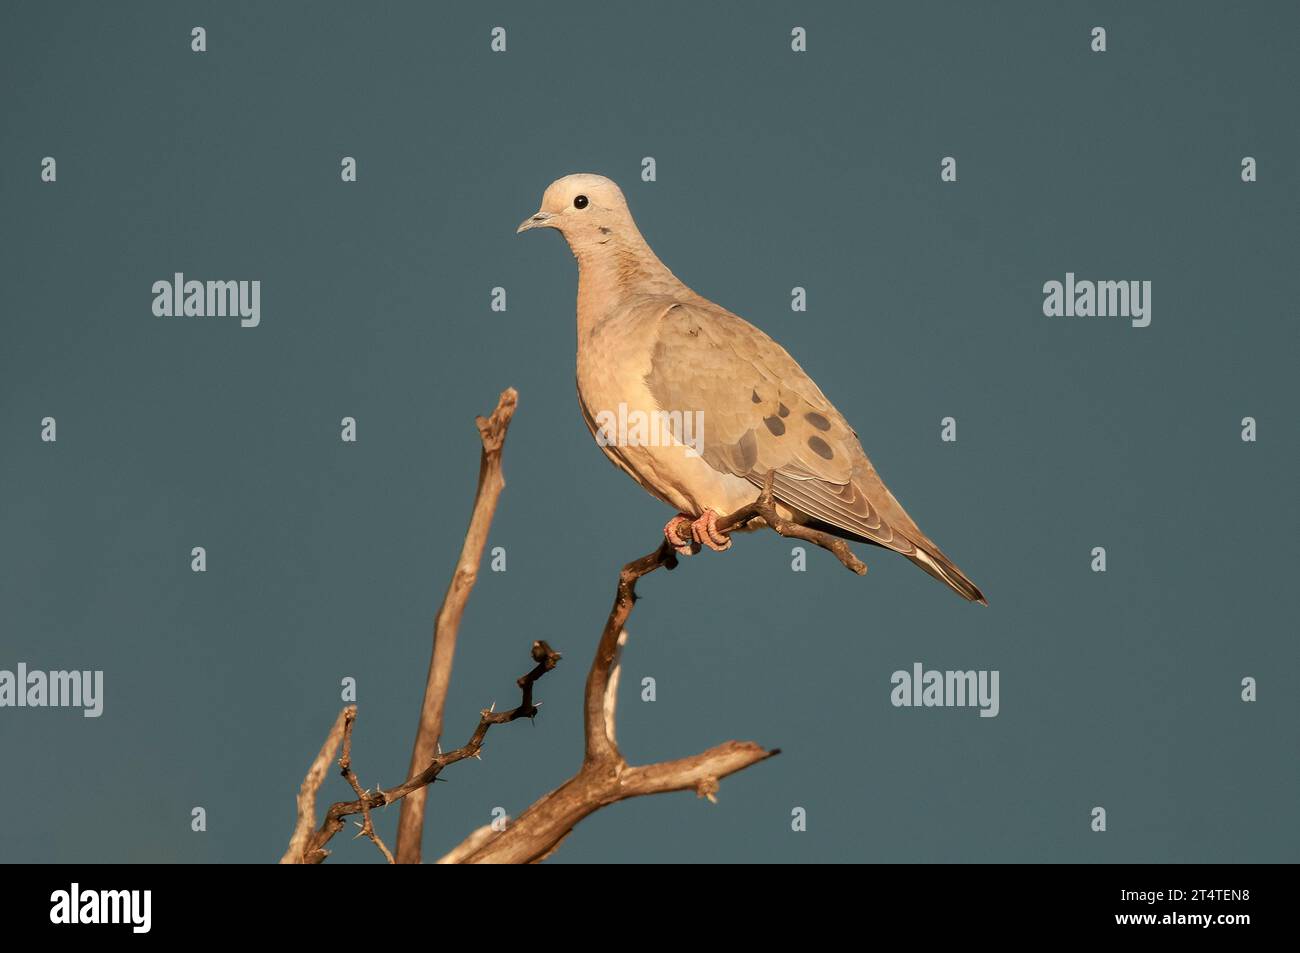 Eared Dove in Calden forest environment, La Pampa, Argentina Stock Photo